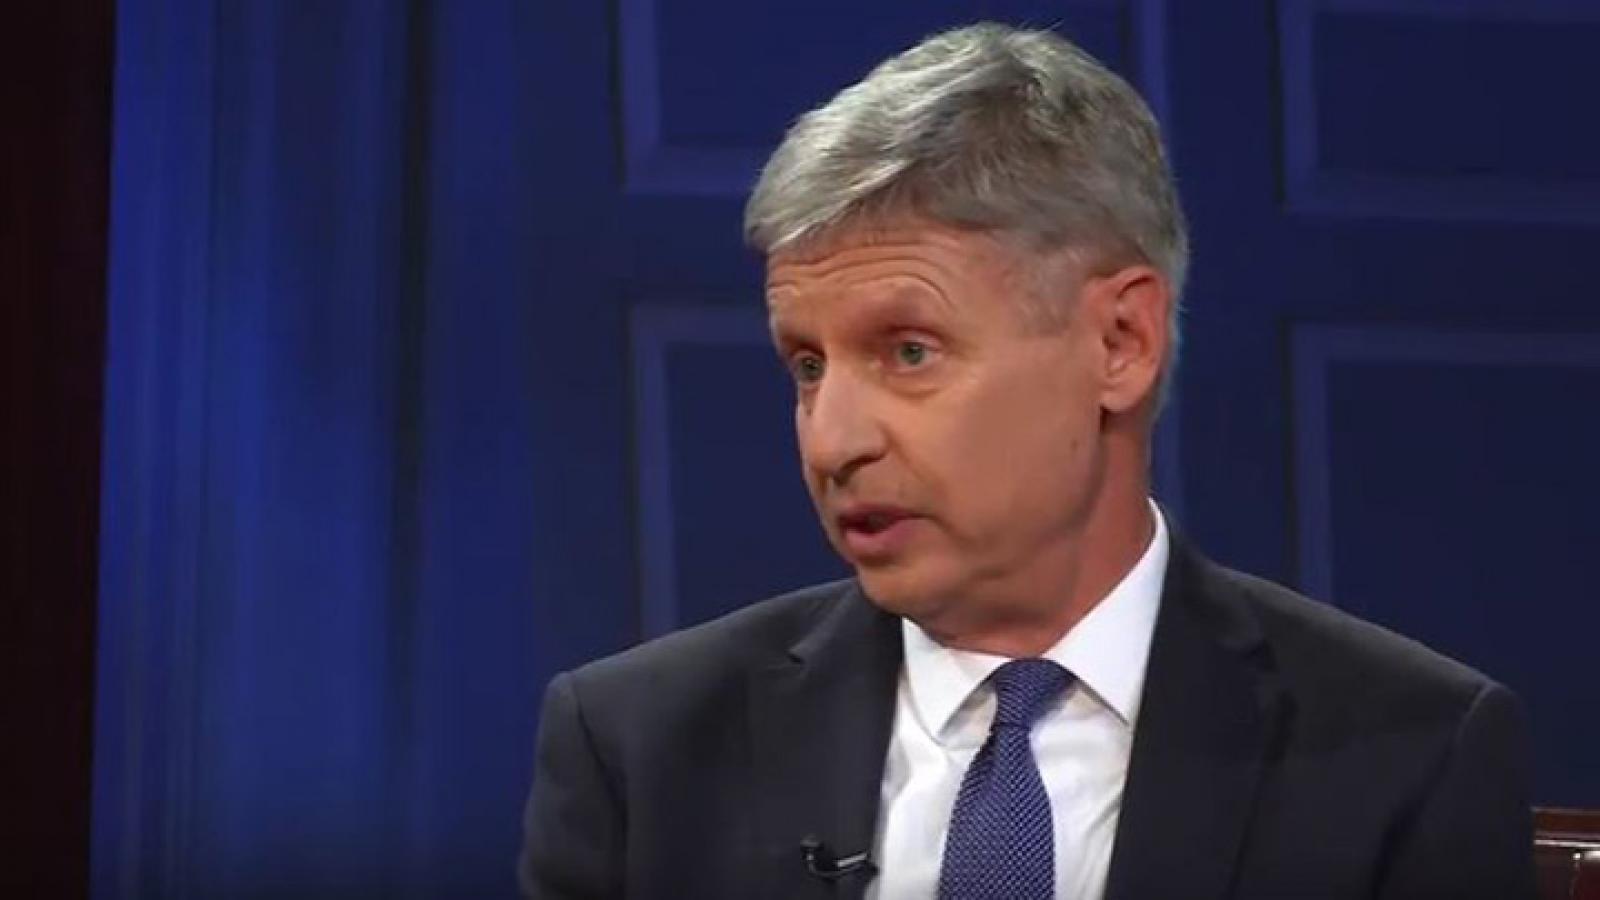 Libertarian presidential candidate Gary Johnson describes his party's stance on gun rights